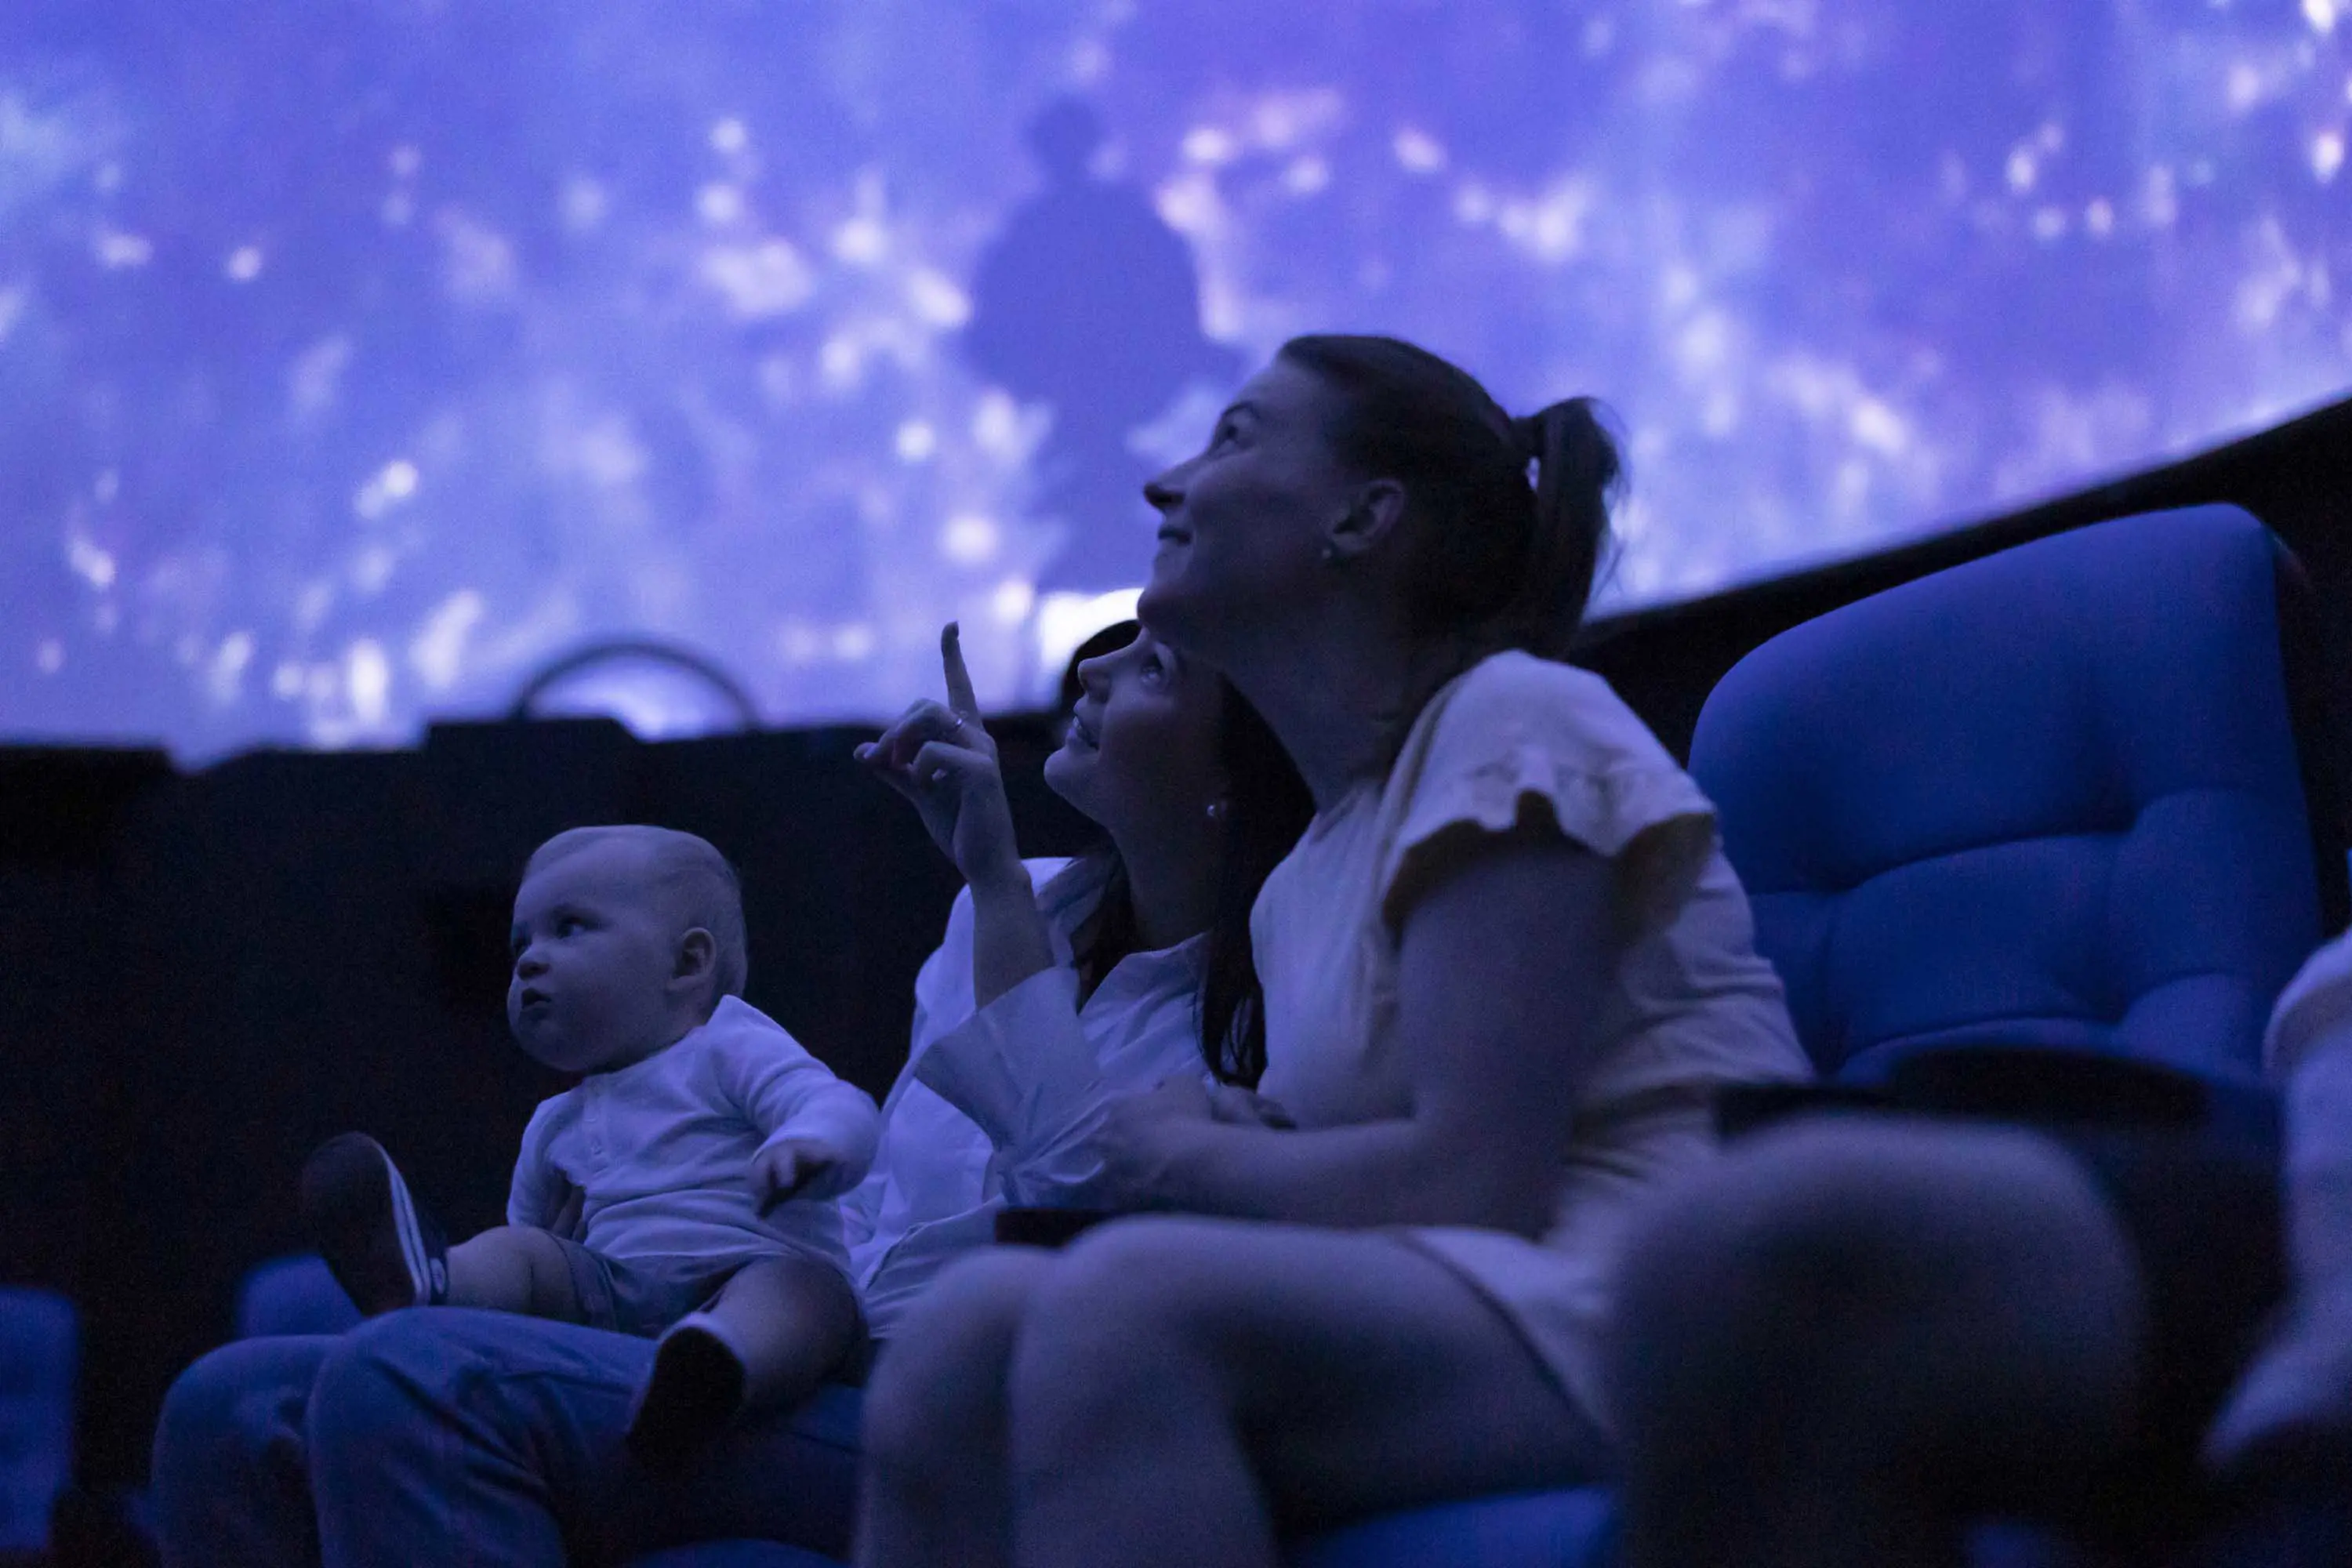 A mother, her daughter and her baby sit in the blue light of a spherical room looking up and pointing at a galaxy projected onto the ceiling.